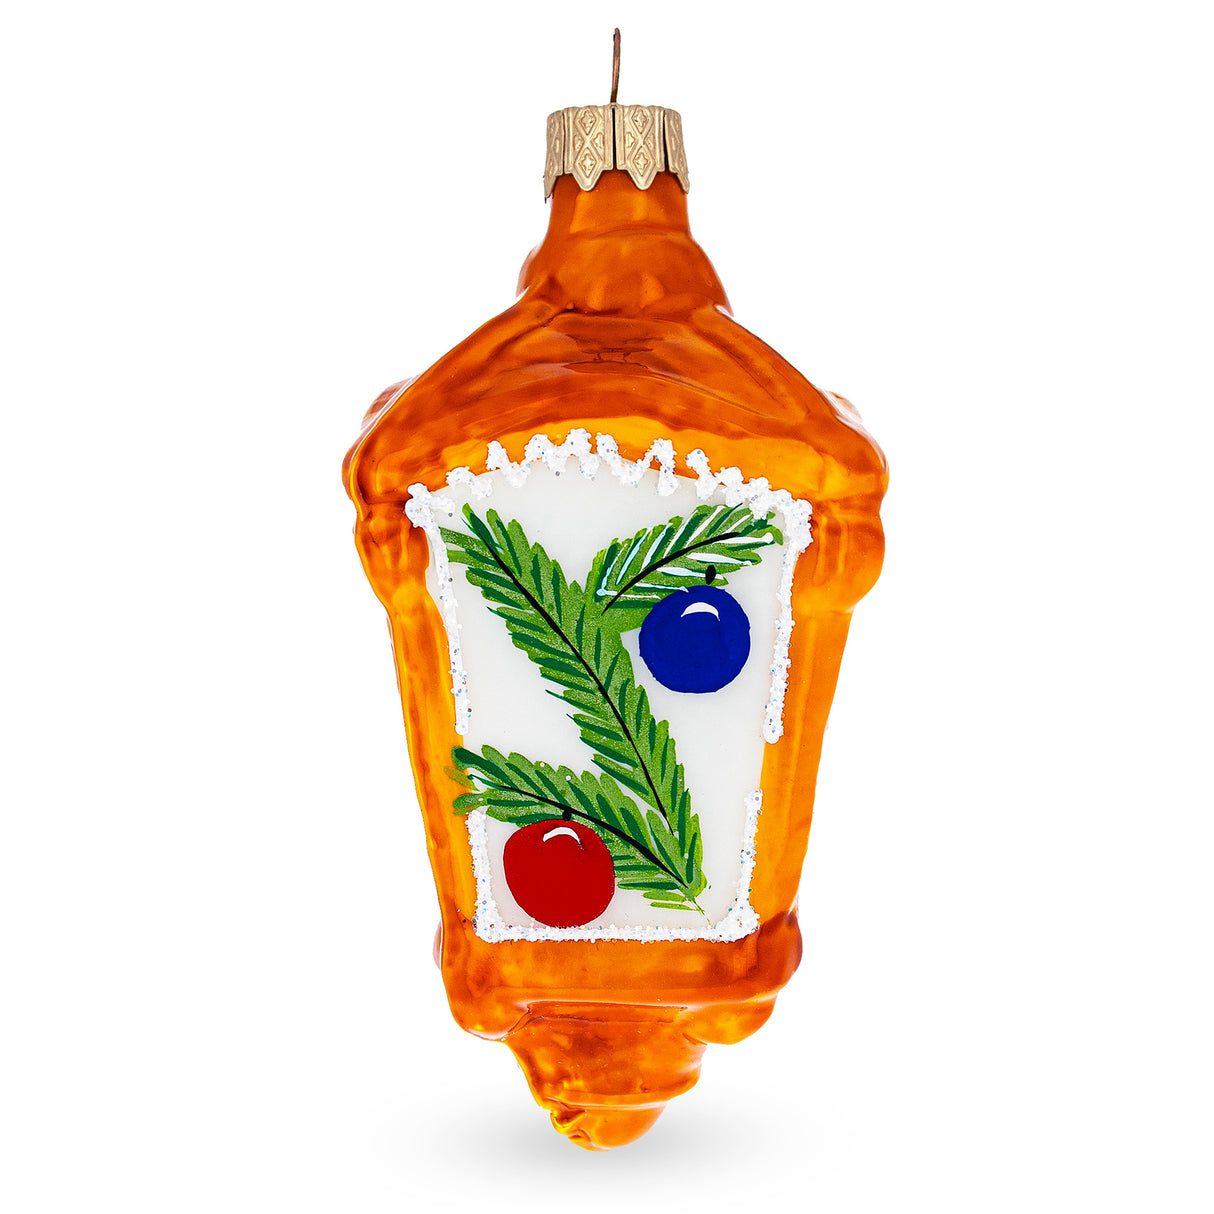 Glass Lantern with Glowing Candles Glass Christmas Ornament in Orange color